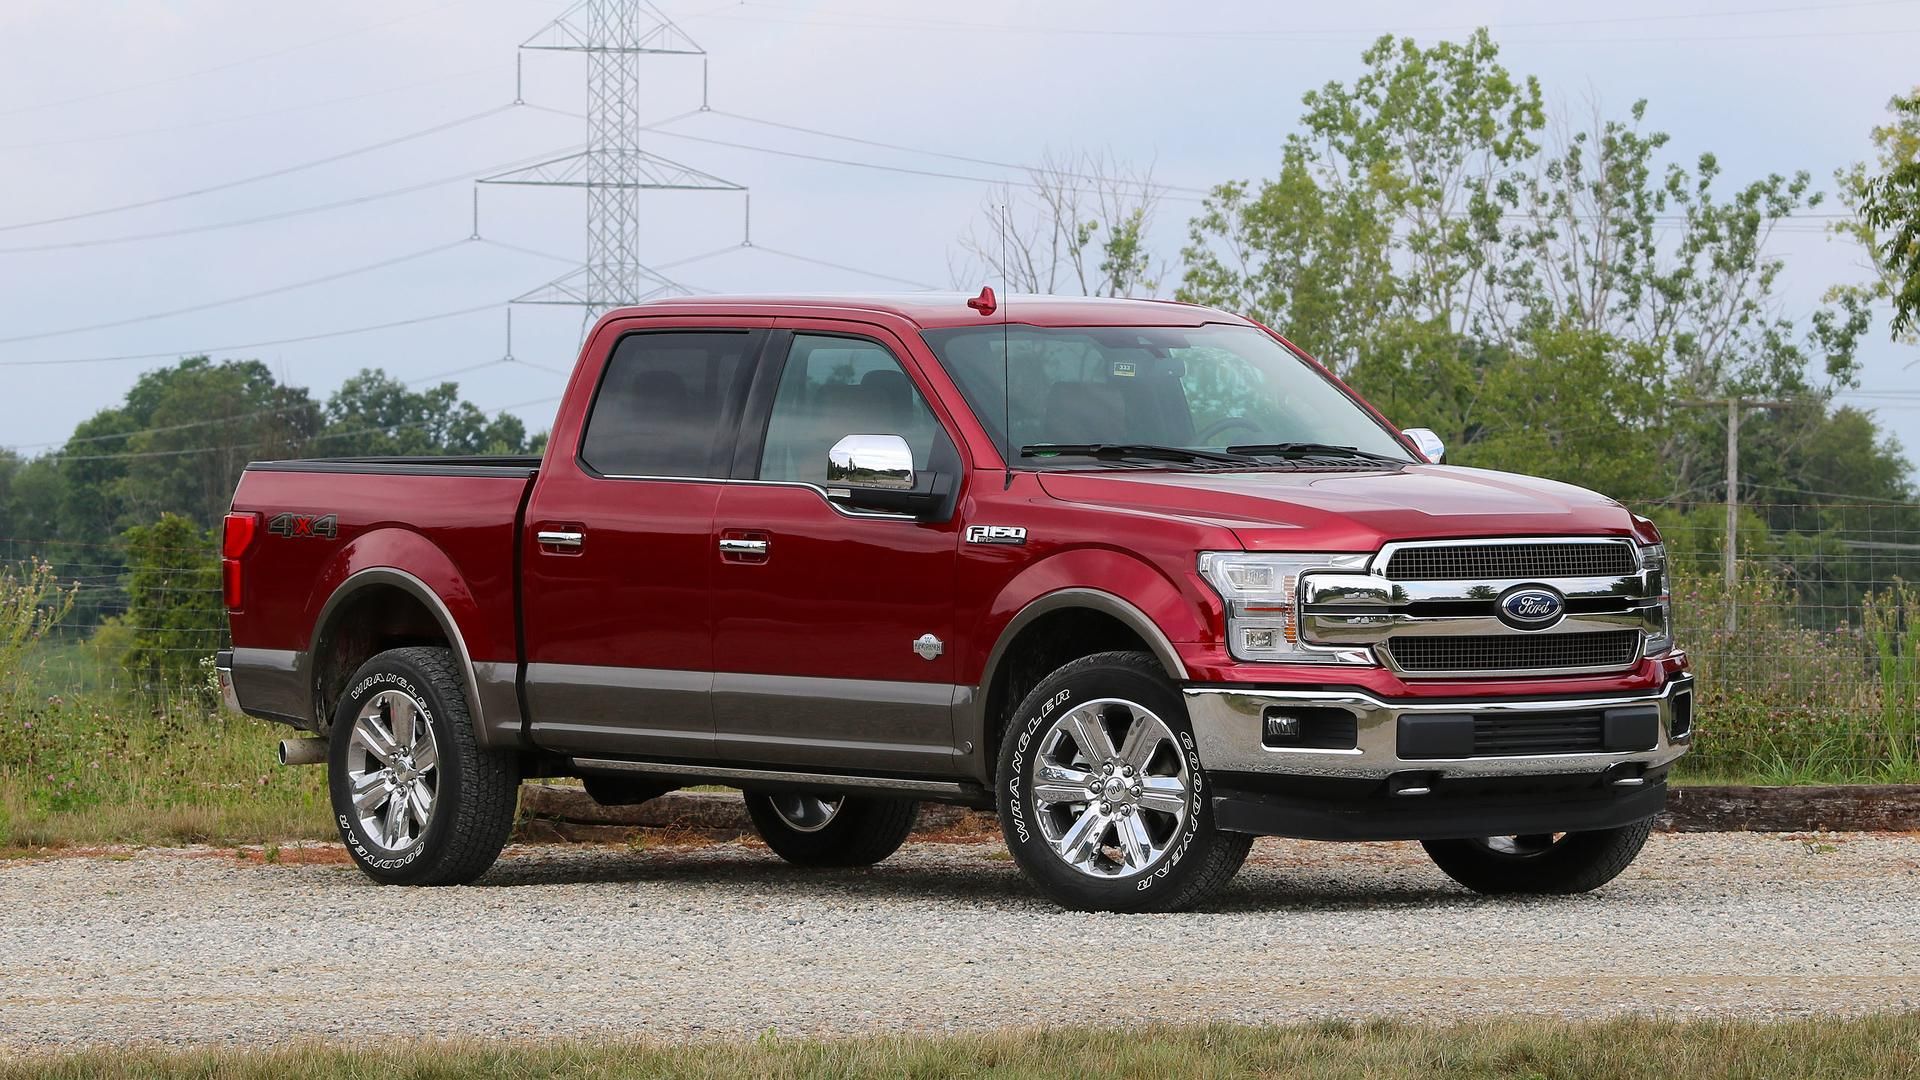 2018 Ford F-150 4x2-regular-cab-short-bed XLT 0-60 Times, Top Speed 2018 Ford F 150 Xlt V6 Towing Capacity